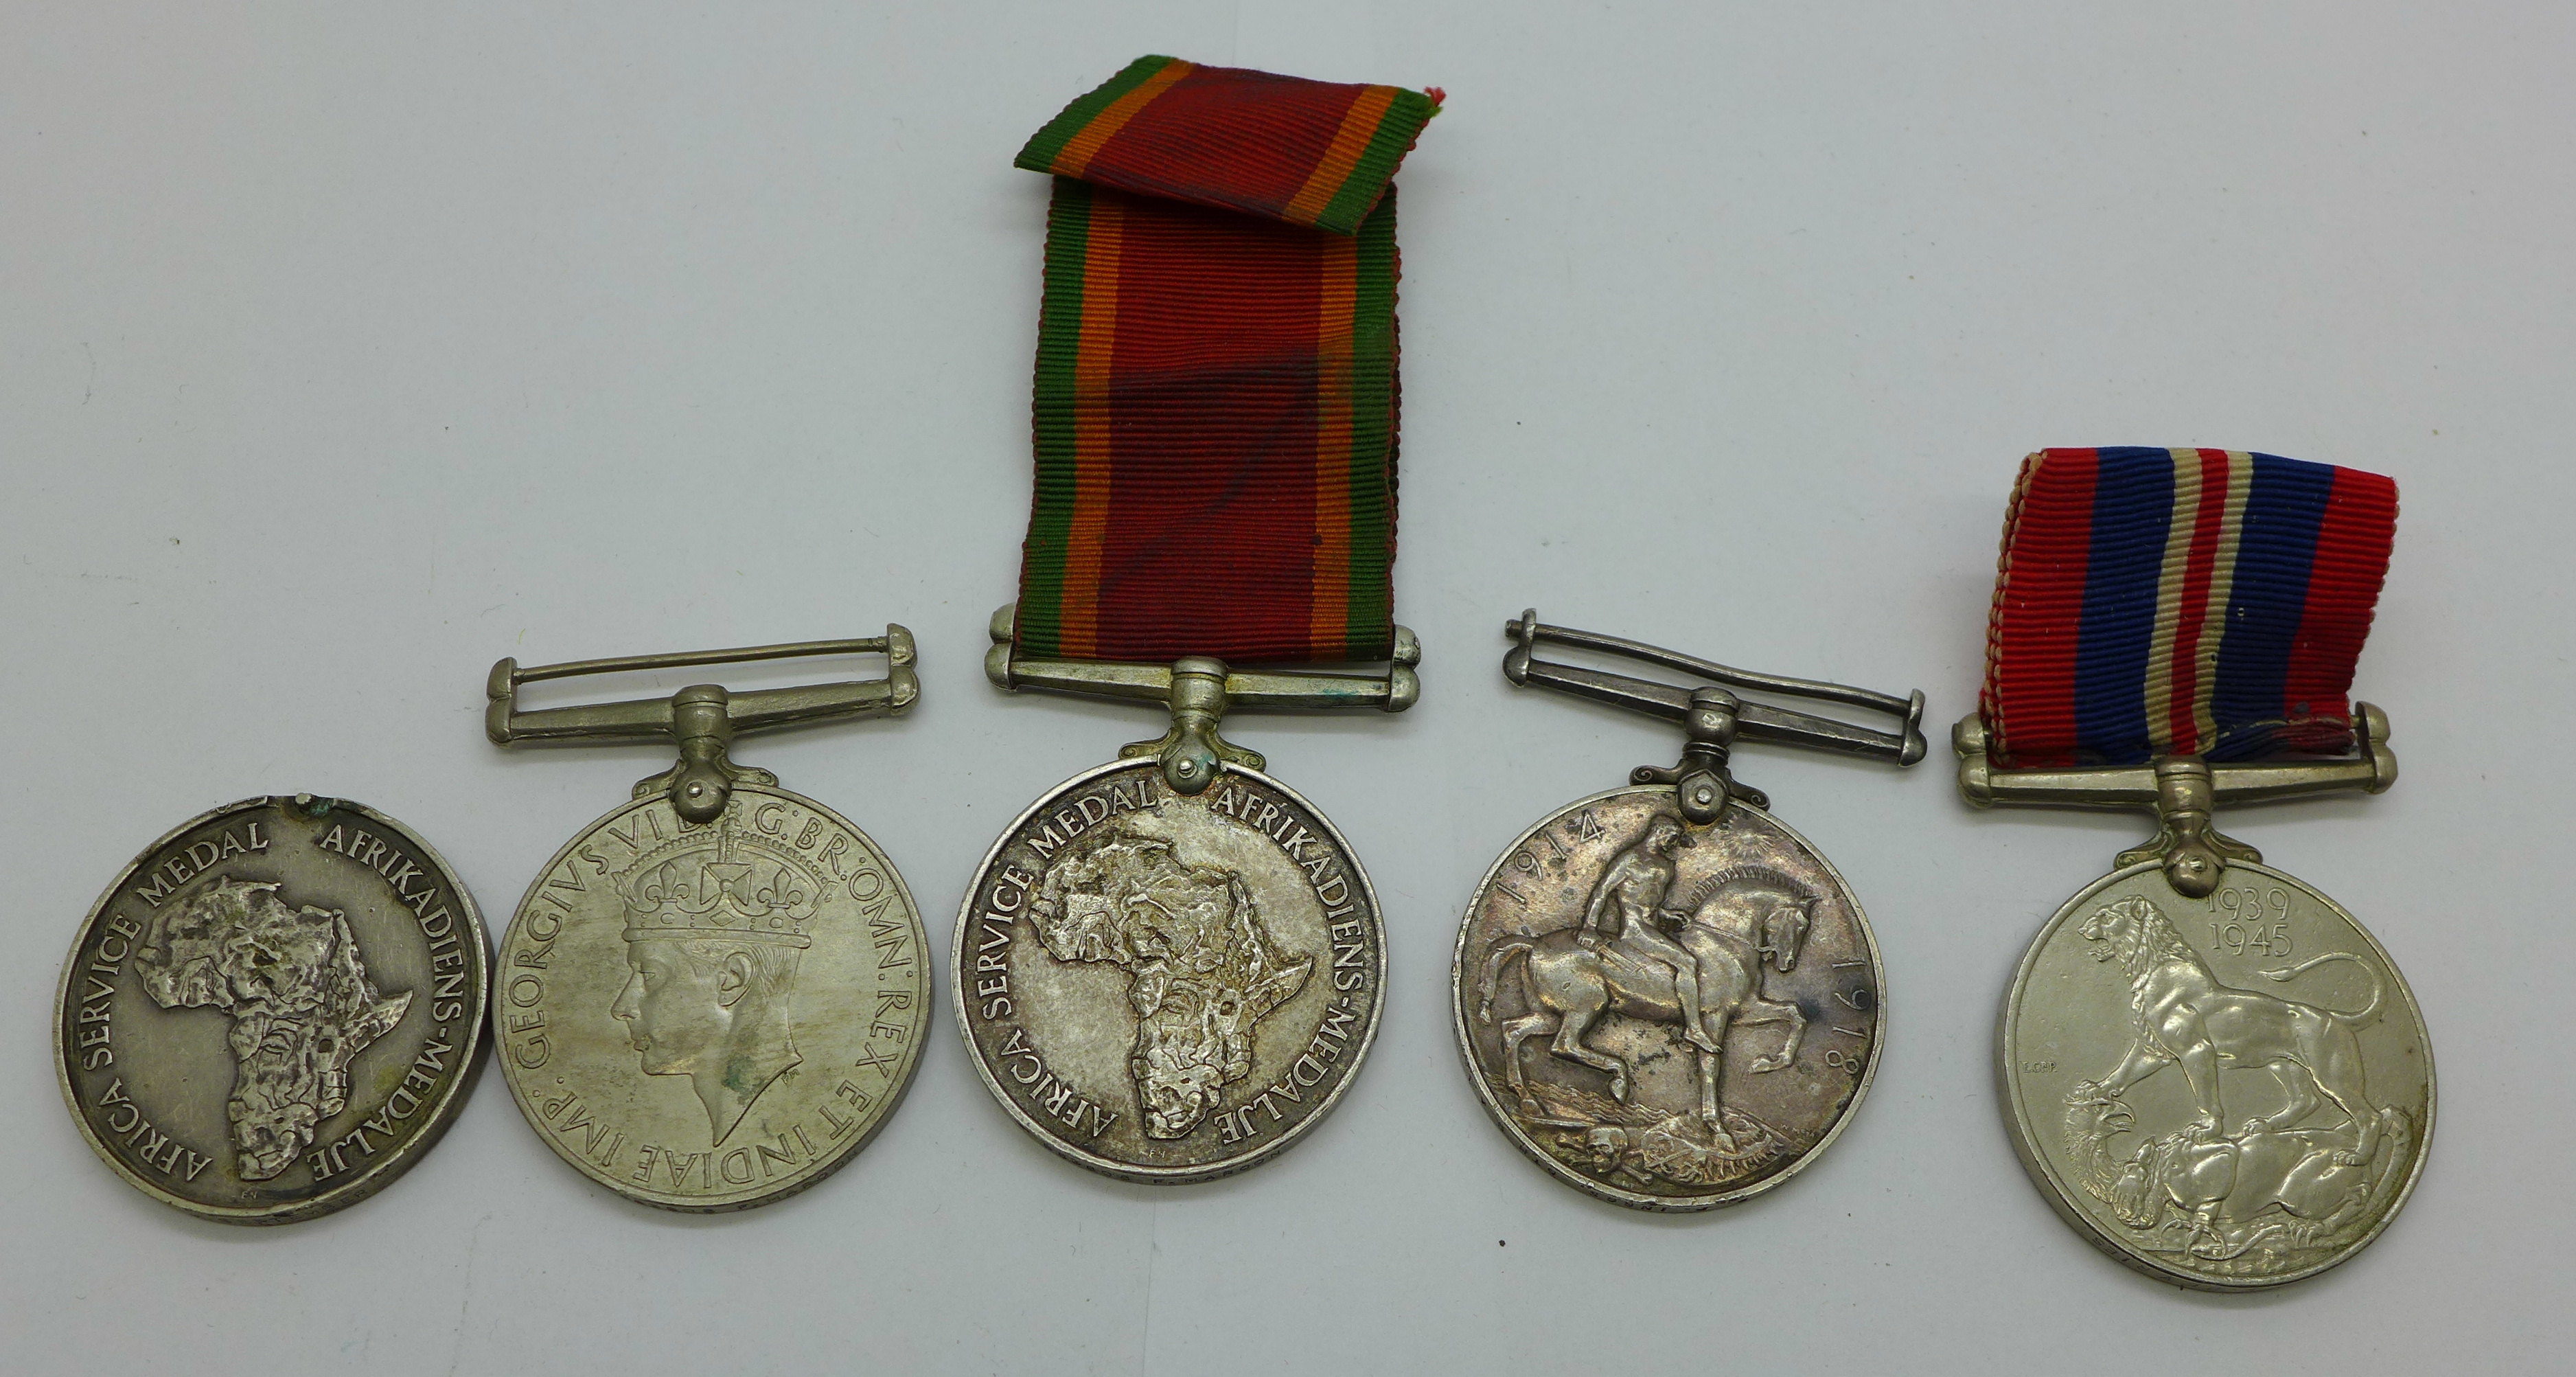 Four WWII medals and a WWI British War medal to Pte. D.P. Inggs 5th S.A.I., a/f